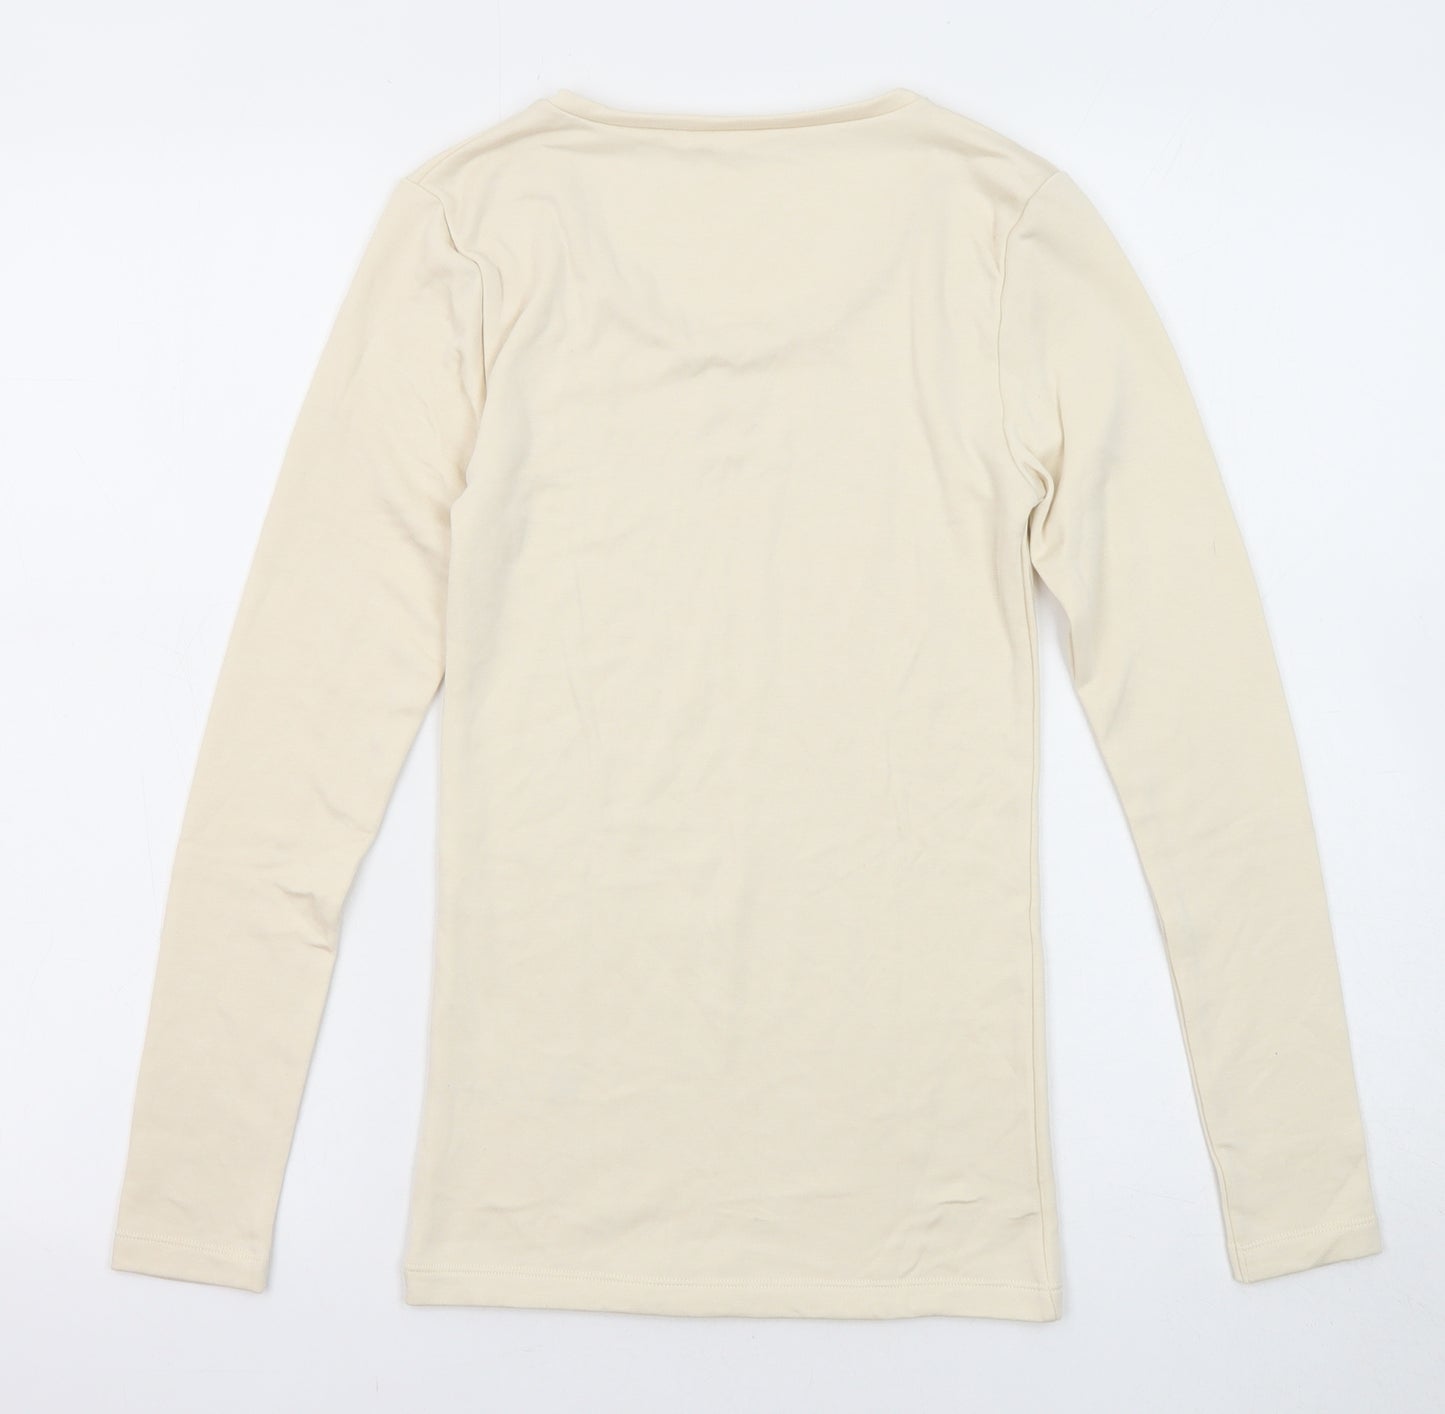 Marks and Spencer Womens Beige Acrylic Basic T-Shirt Size 8 Round Neck - Thermal